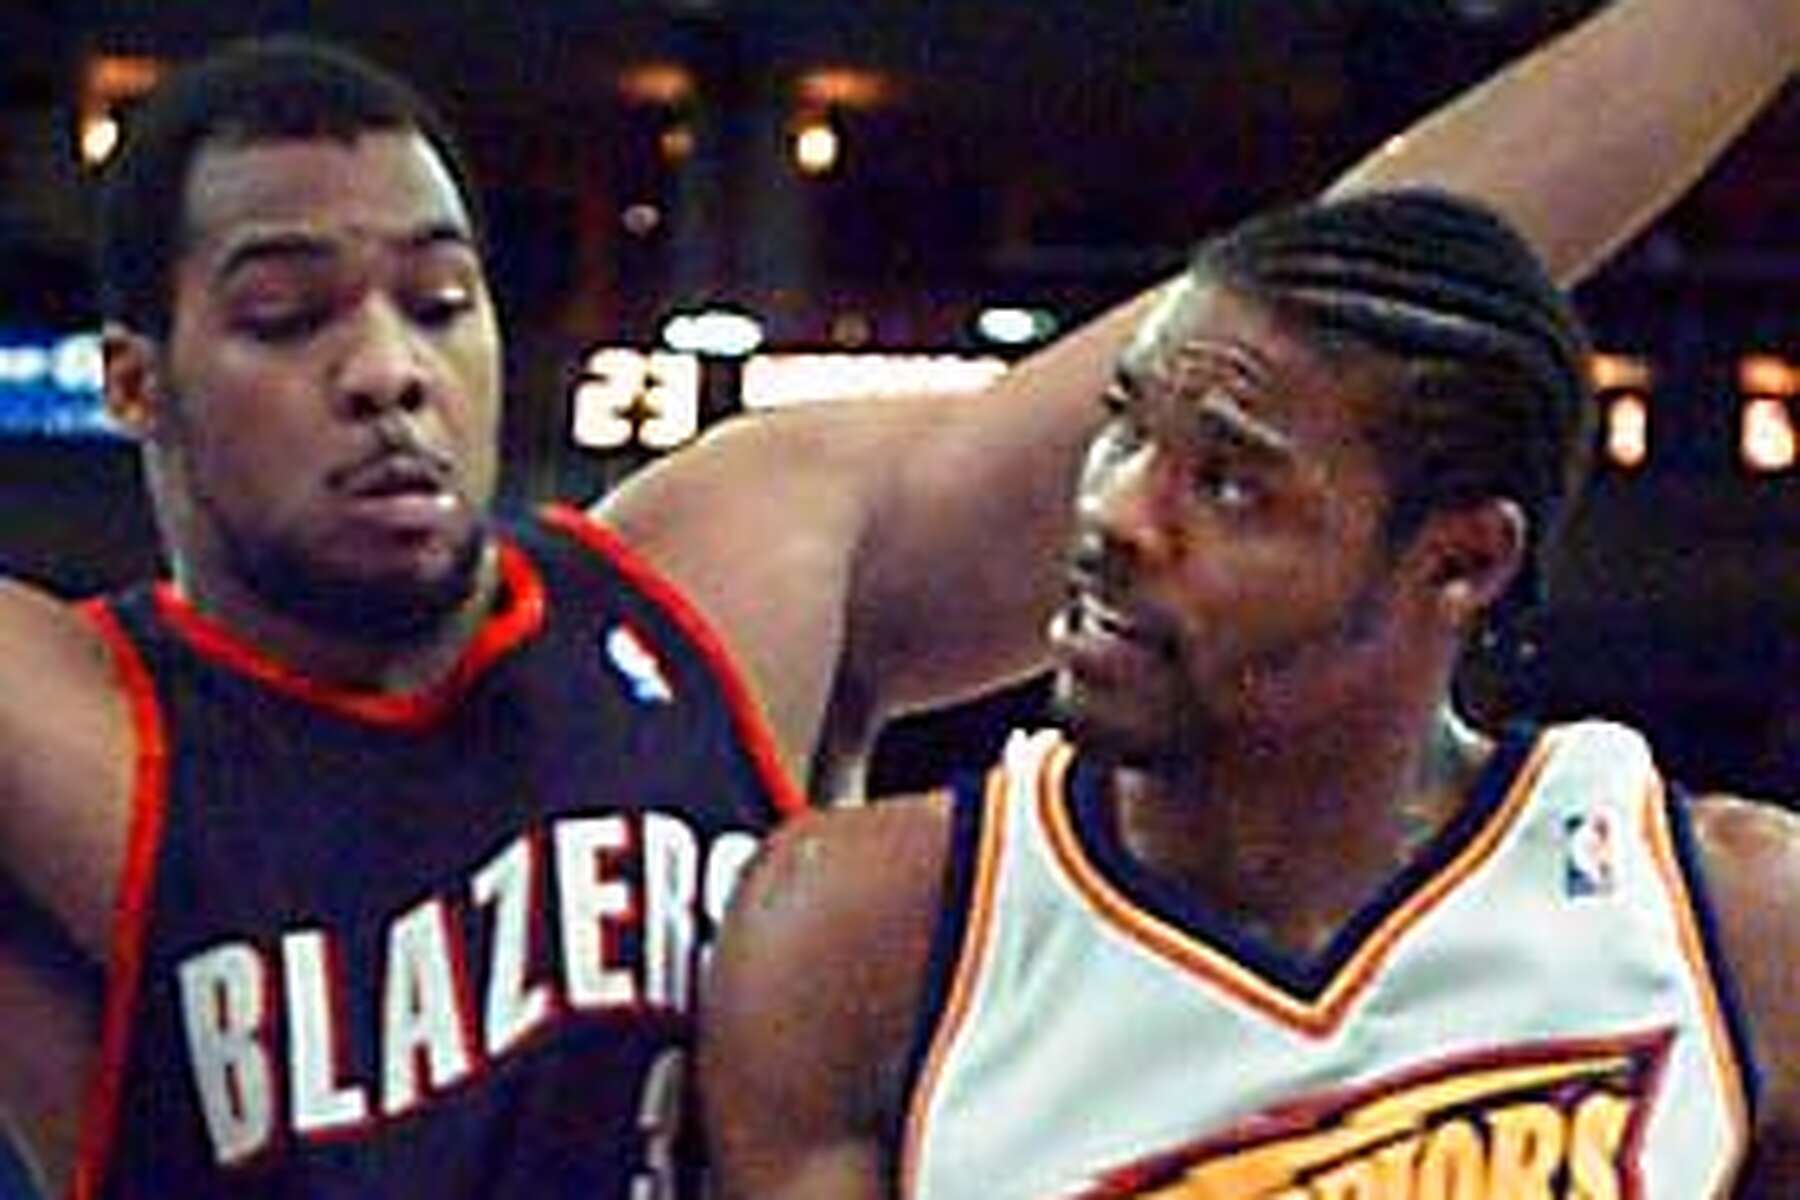 Latrell Sprewell attacks PJ Carlesimo: Then and now